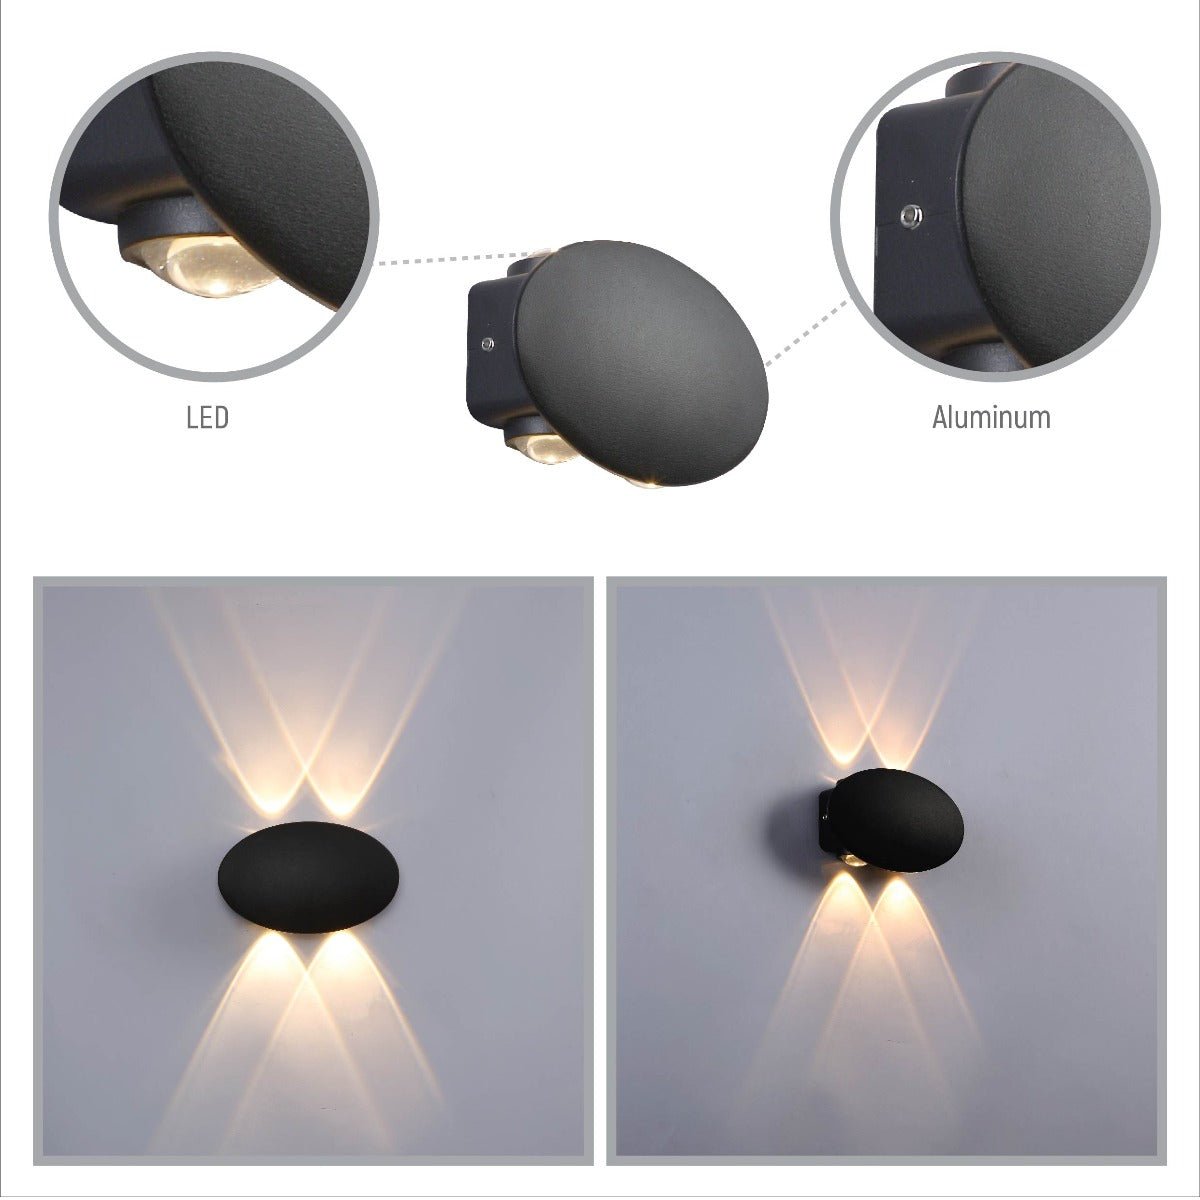 Presents the light effect of 4 lamp 182-03374 W shape effect